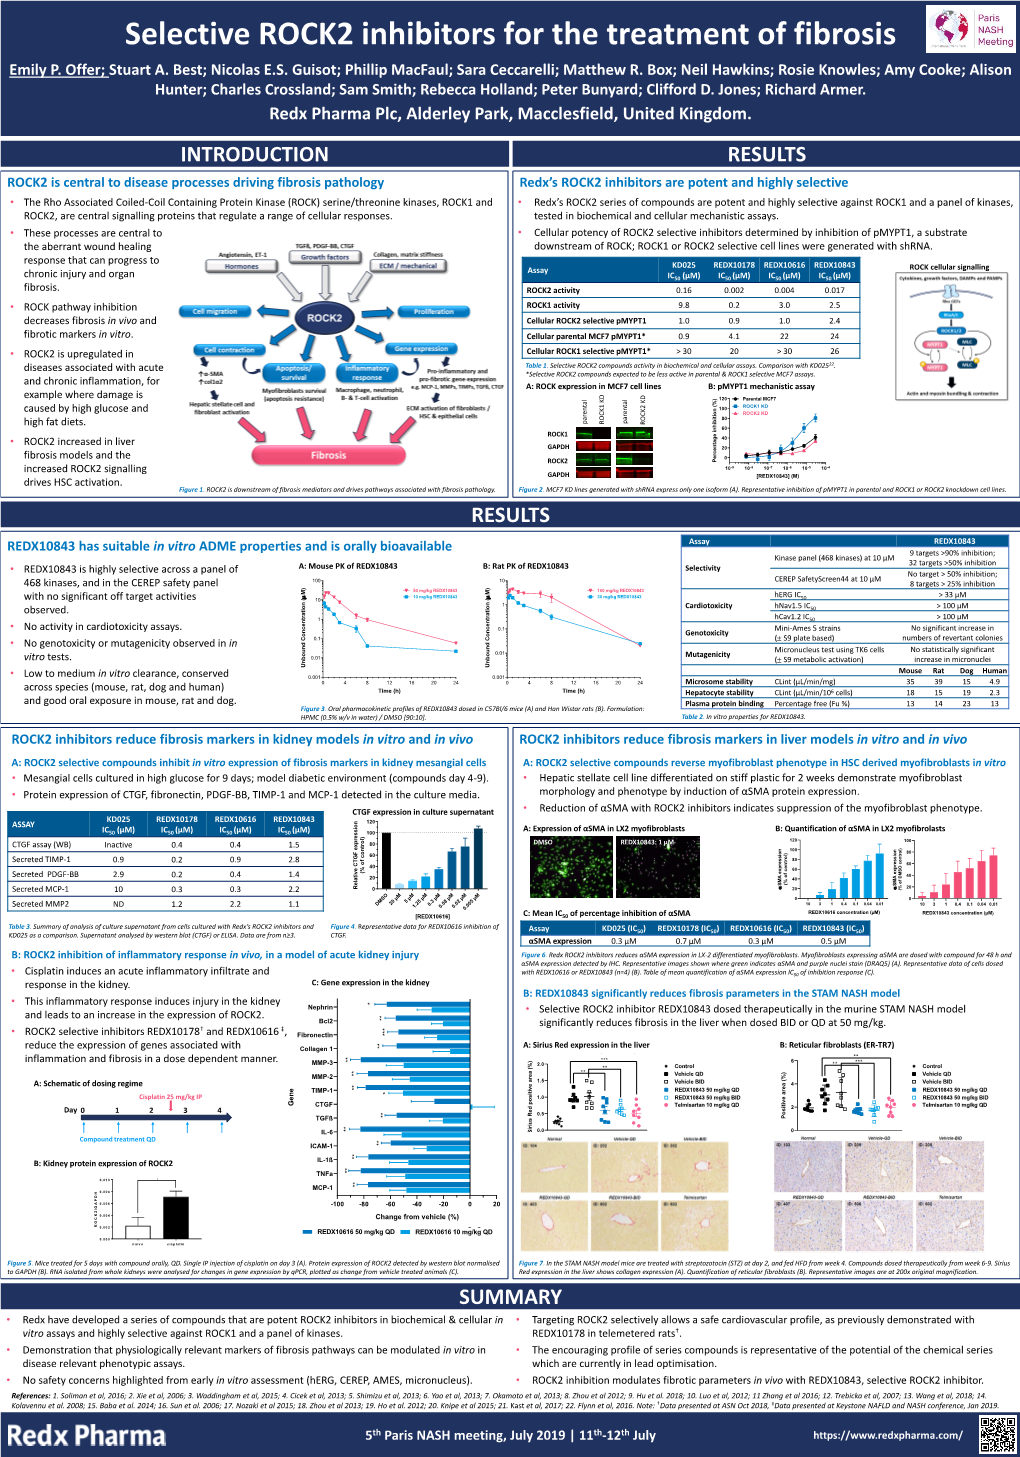 Paris NASH Meeting 2019 Poster – Selective ROCK2 Inhibitors for The